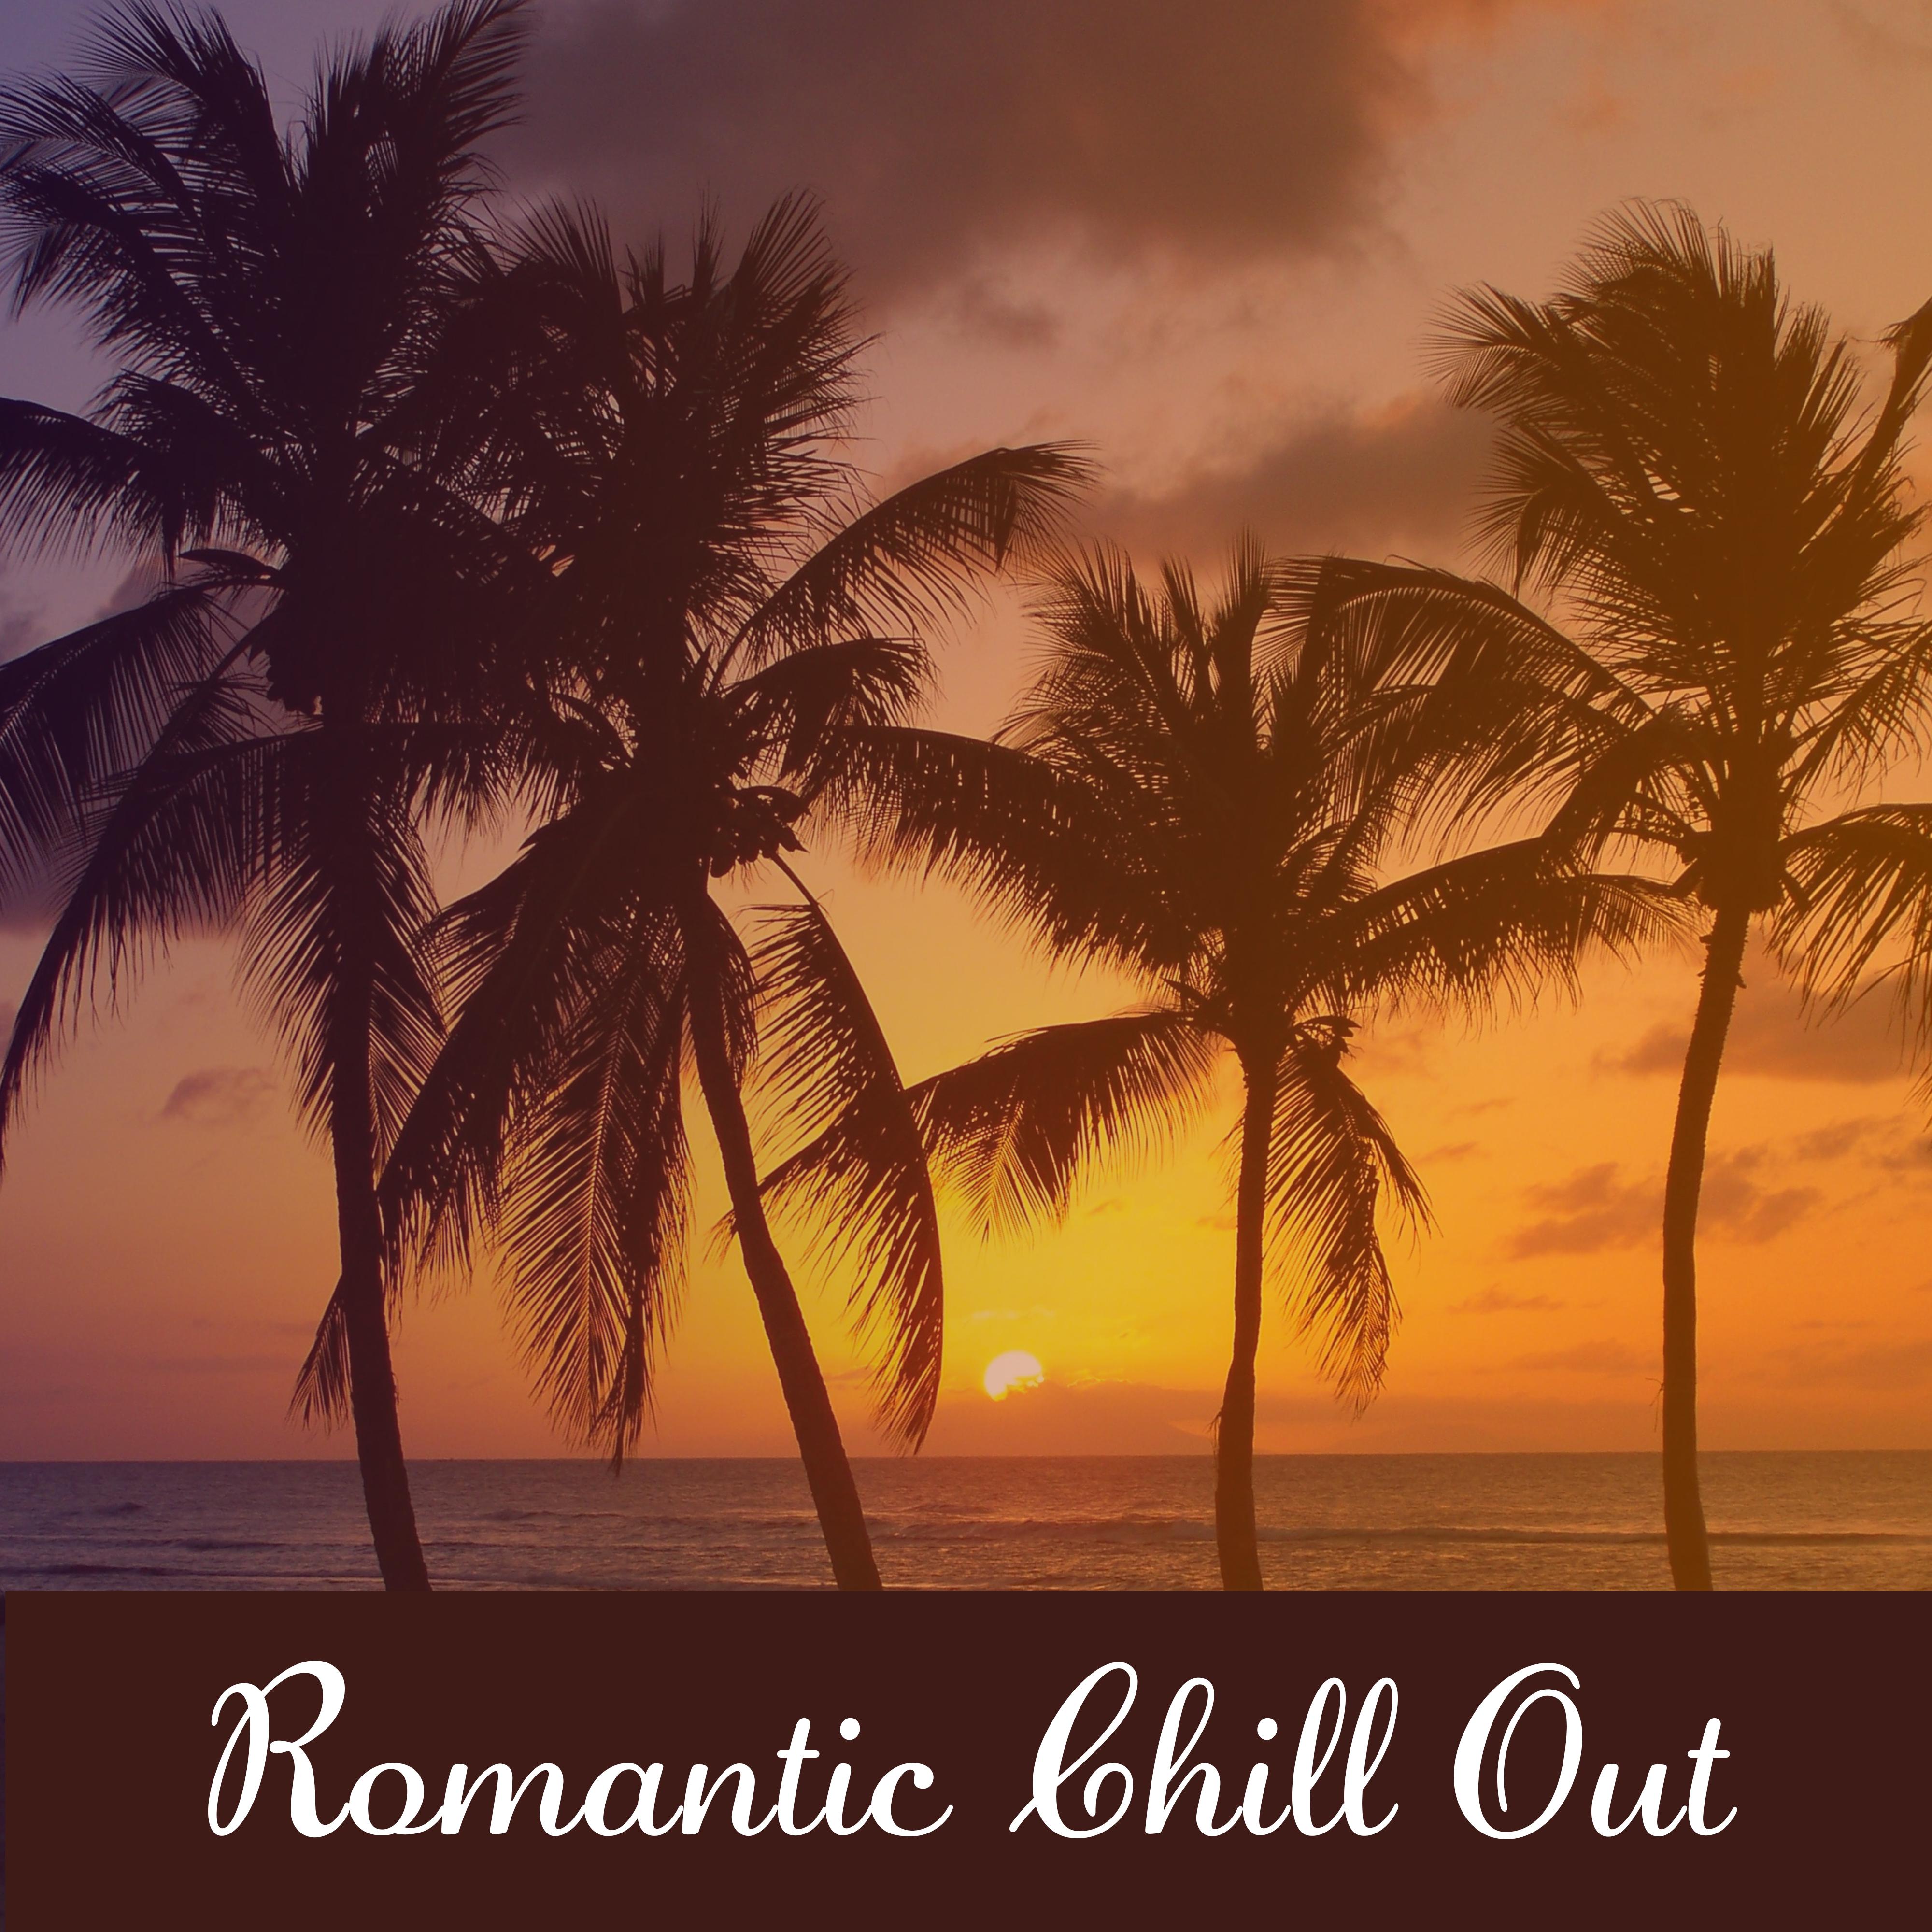 Romantic Chill Out – Sexy Chill Out Vibes, Erotic Dance, Sensual Massage, Chill Out Music